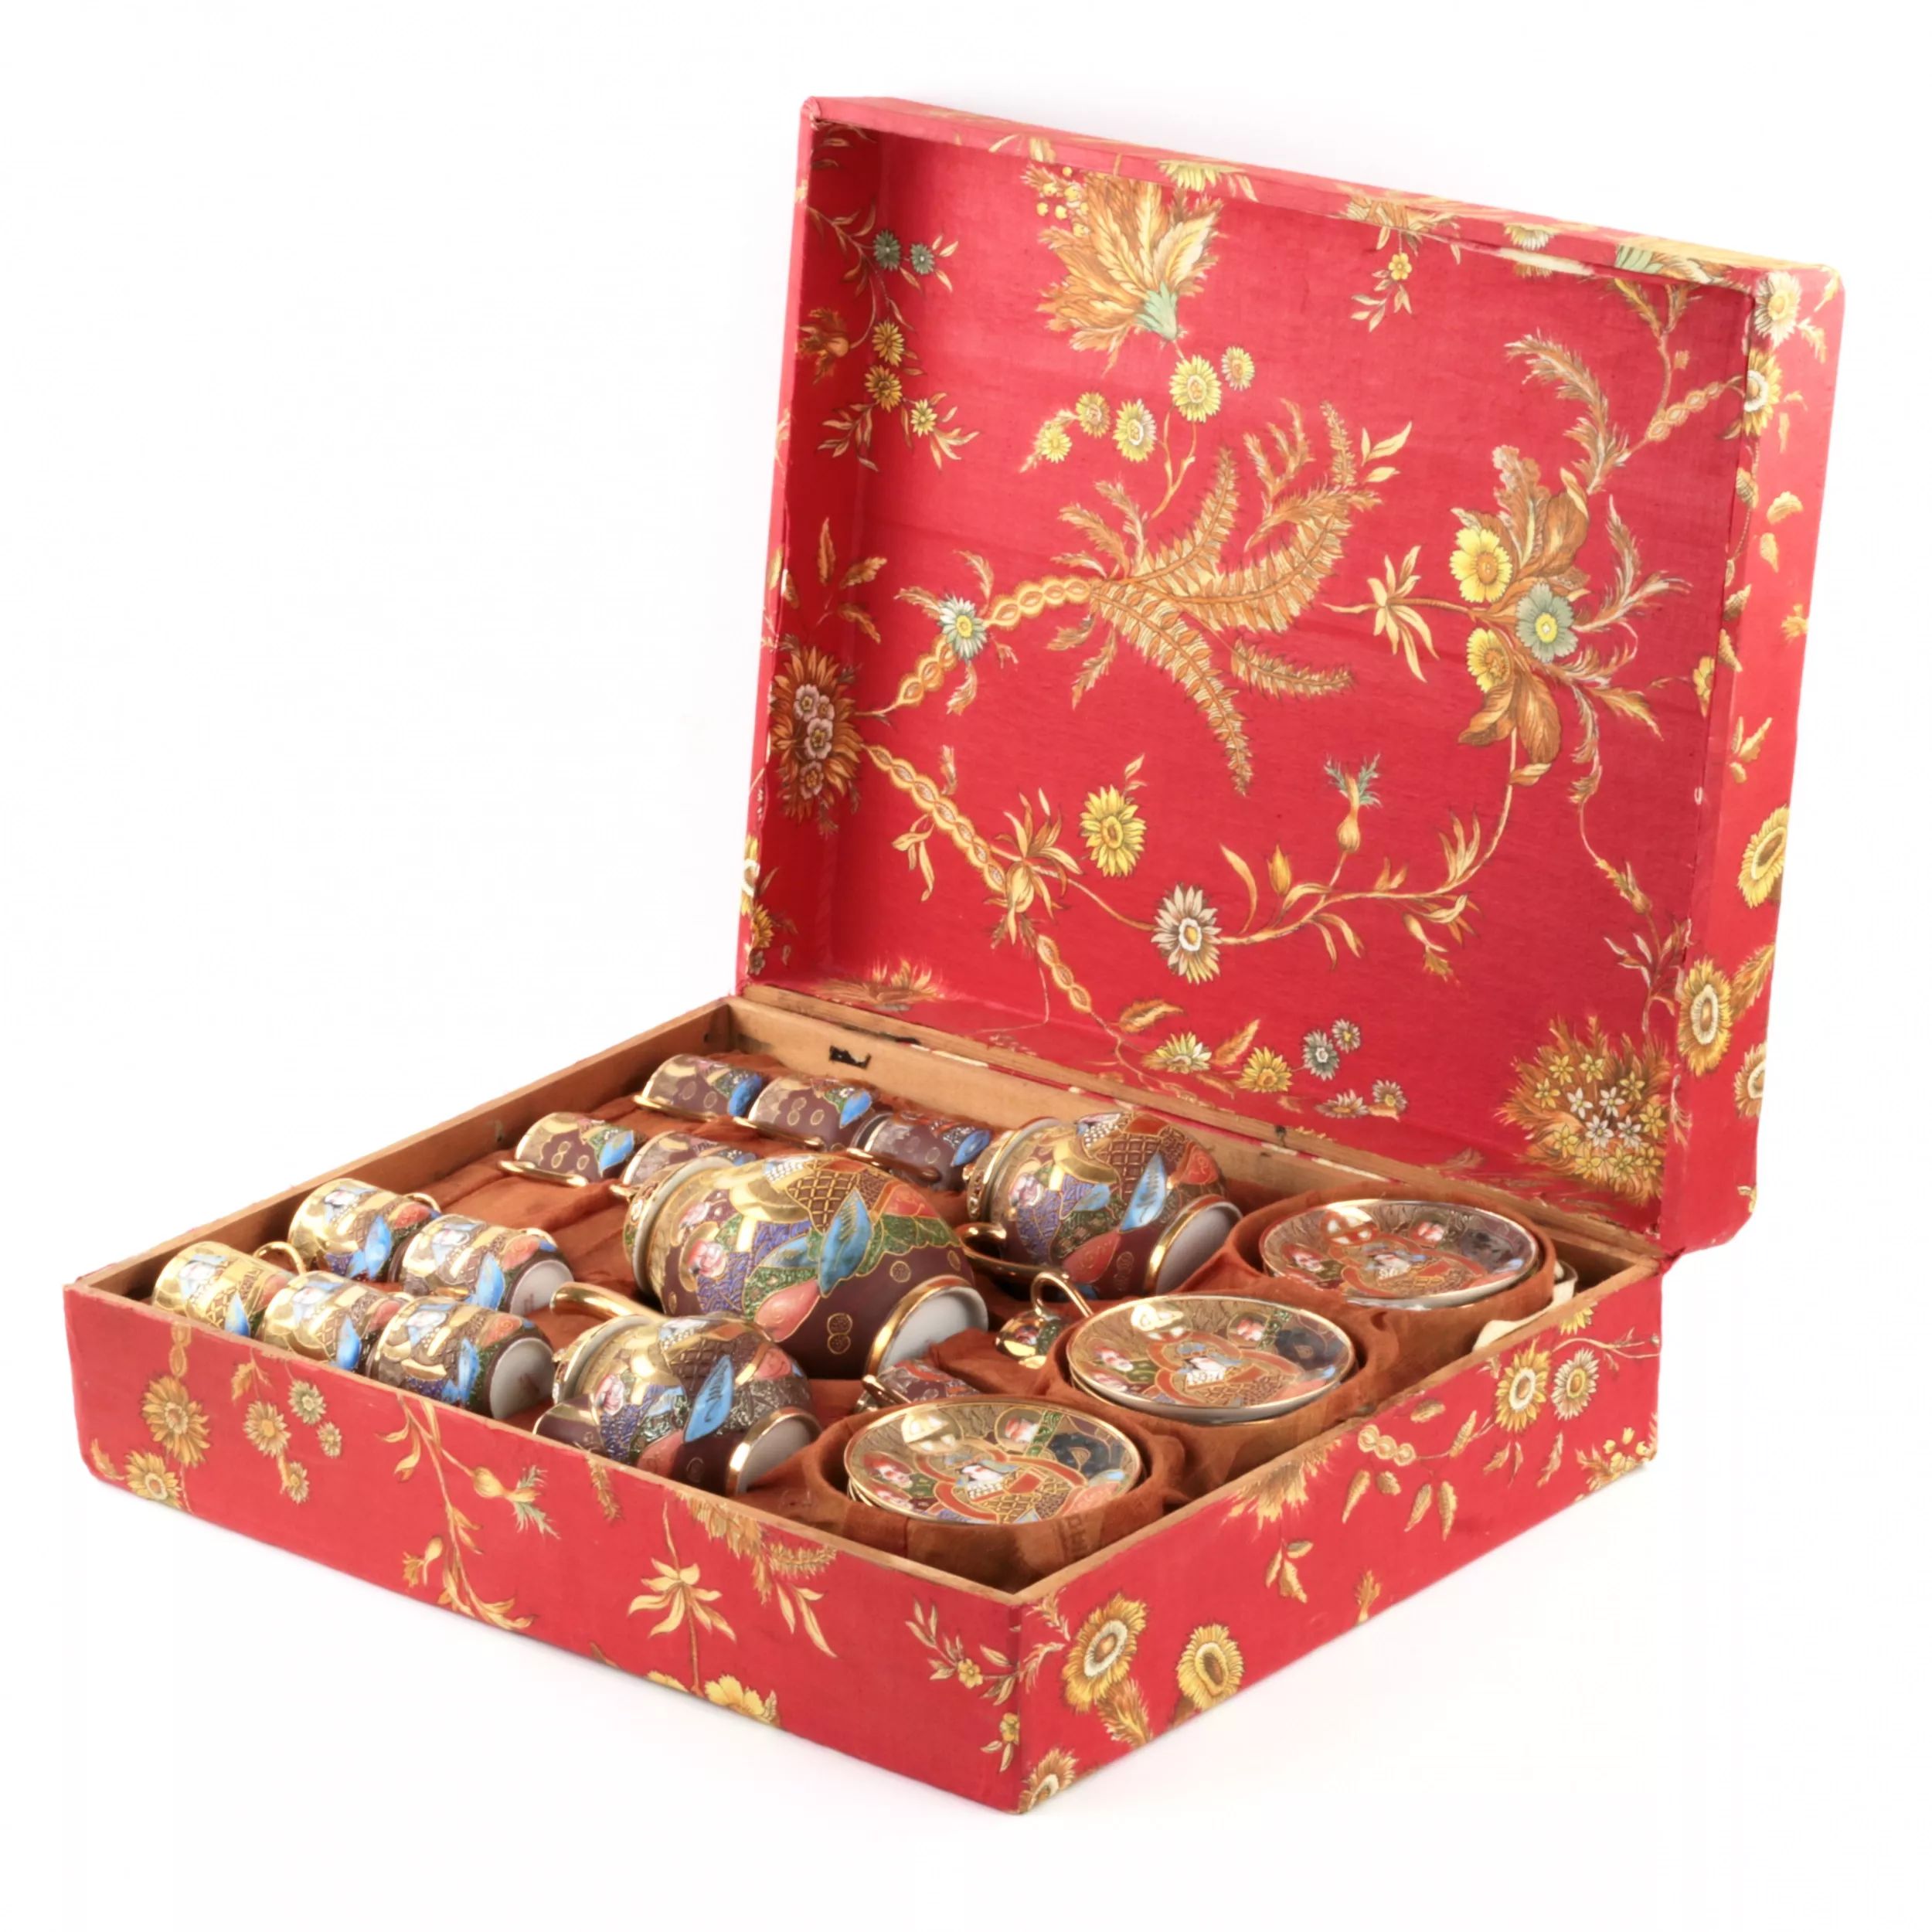 A-complete-Satsumi-porcelain-tea-set-in-its-own-wardrobe-trunk-